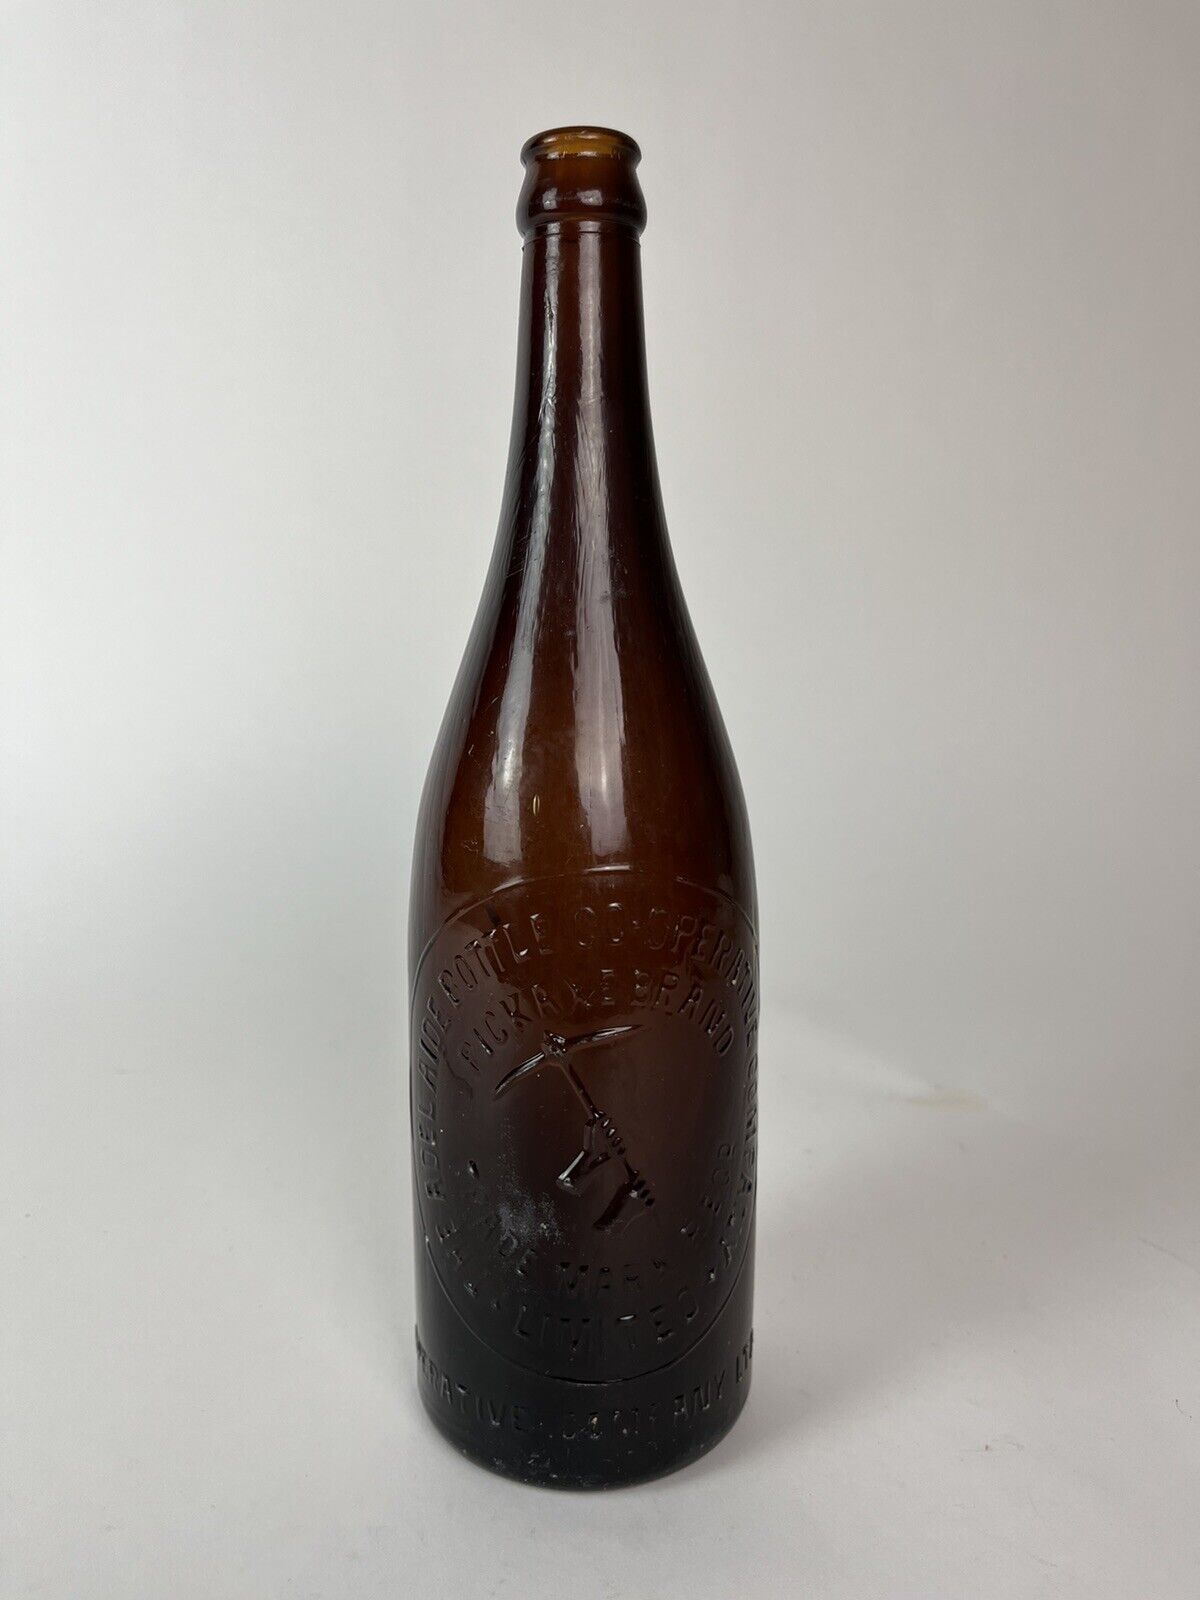 Adelaide Co-Op Company Vintage bottle Rare Brown Color from Australia 2